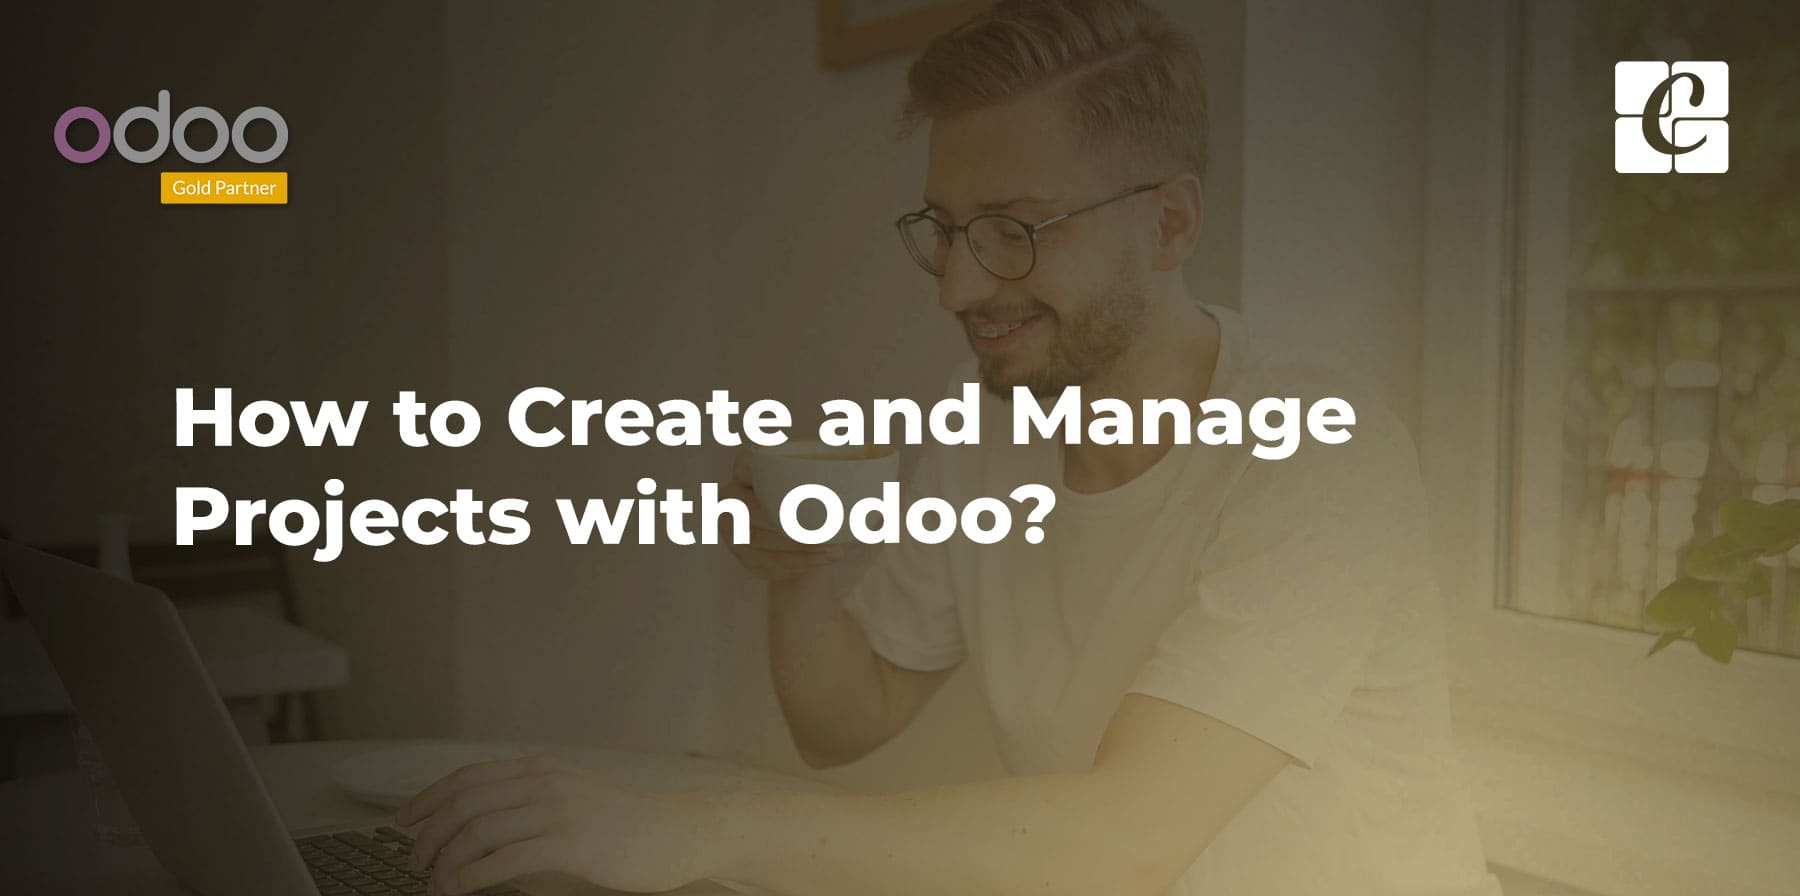 create-manage-projects-with-odoo.jpg